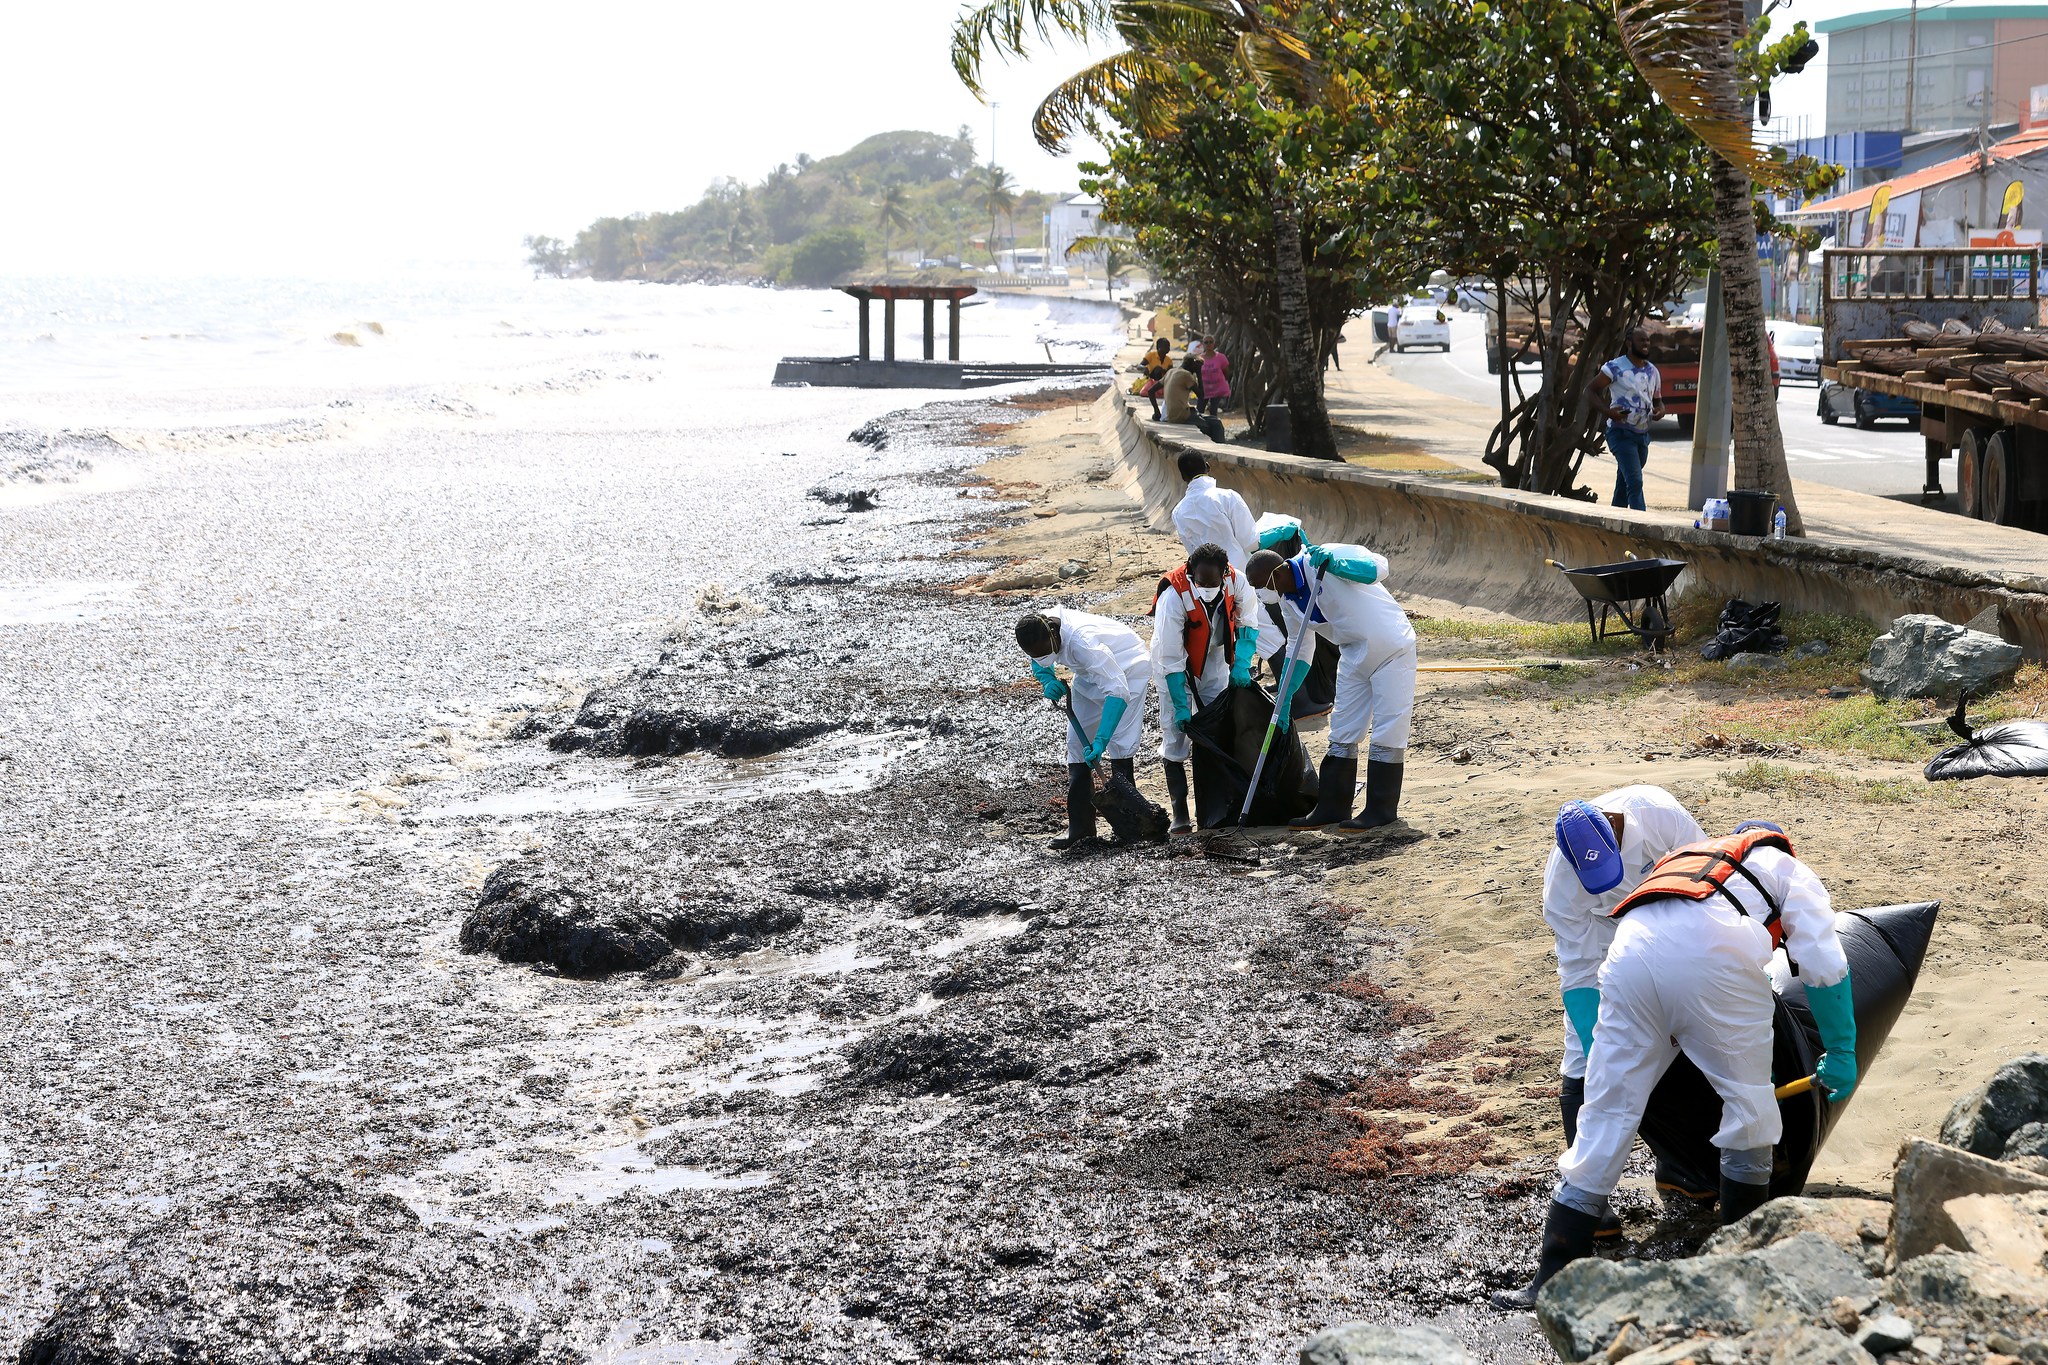 Prime Minister to tour areas impacted by oil spill in Tobago and host press conference